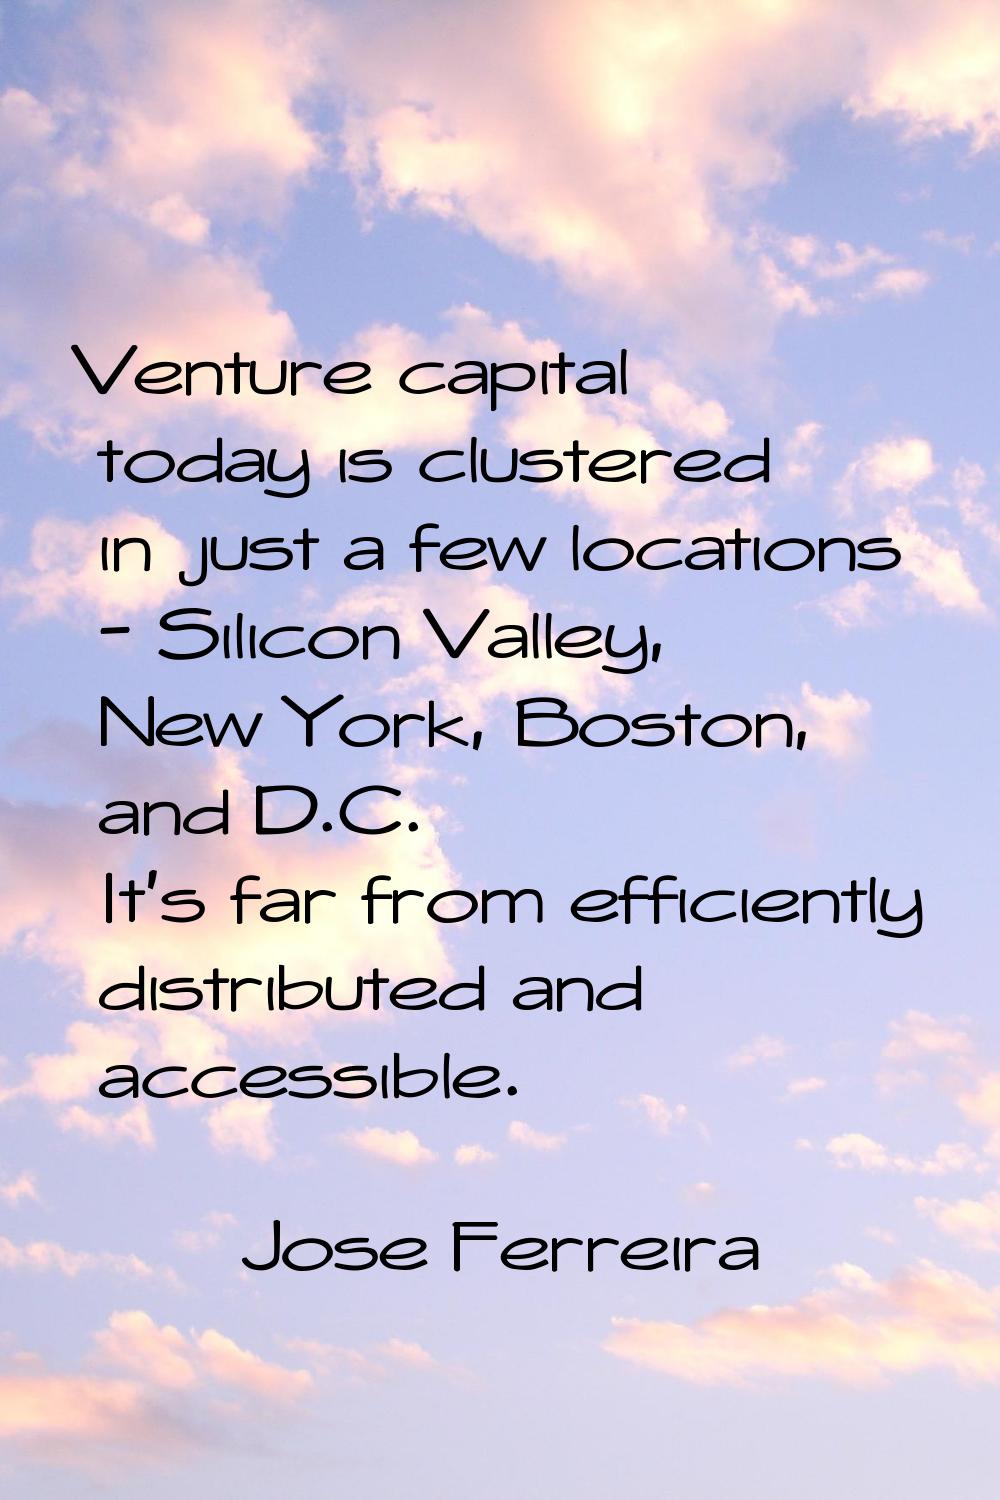 Venture capital today is clustered in just a few locations - Silicon Valley, New York, Boston, and 